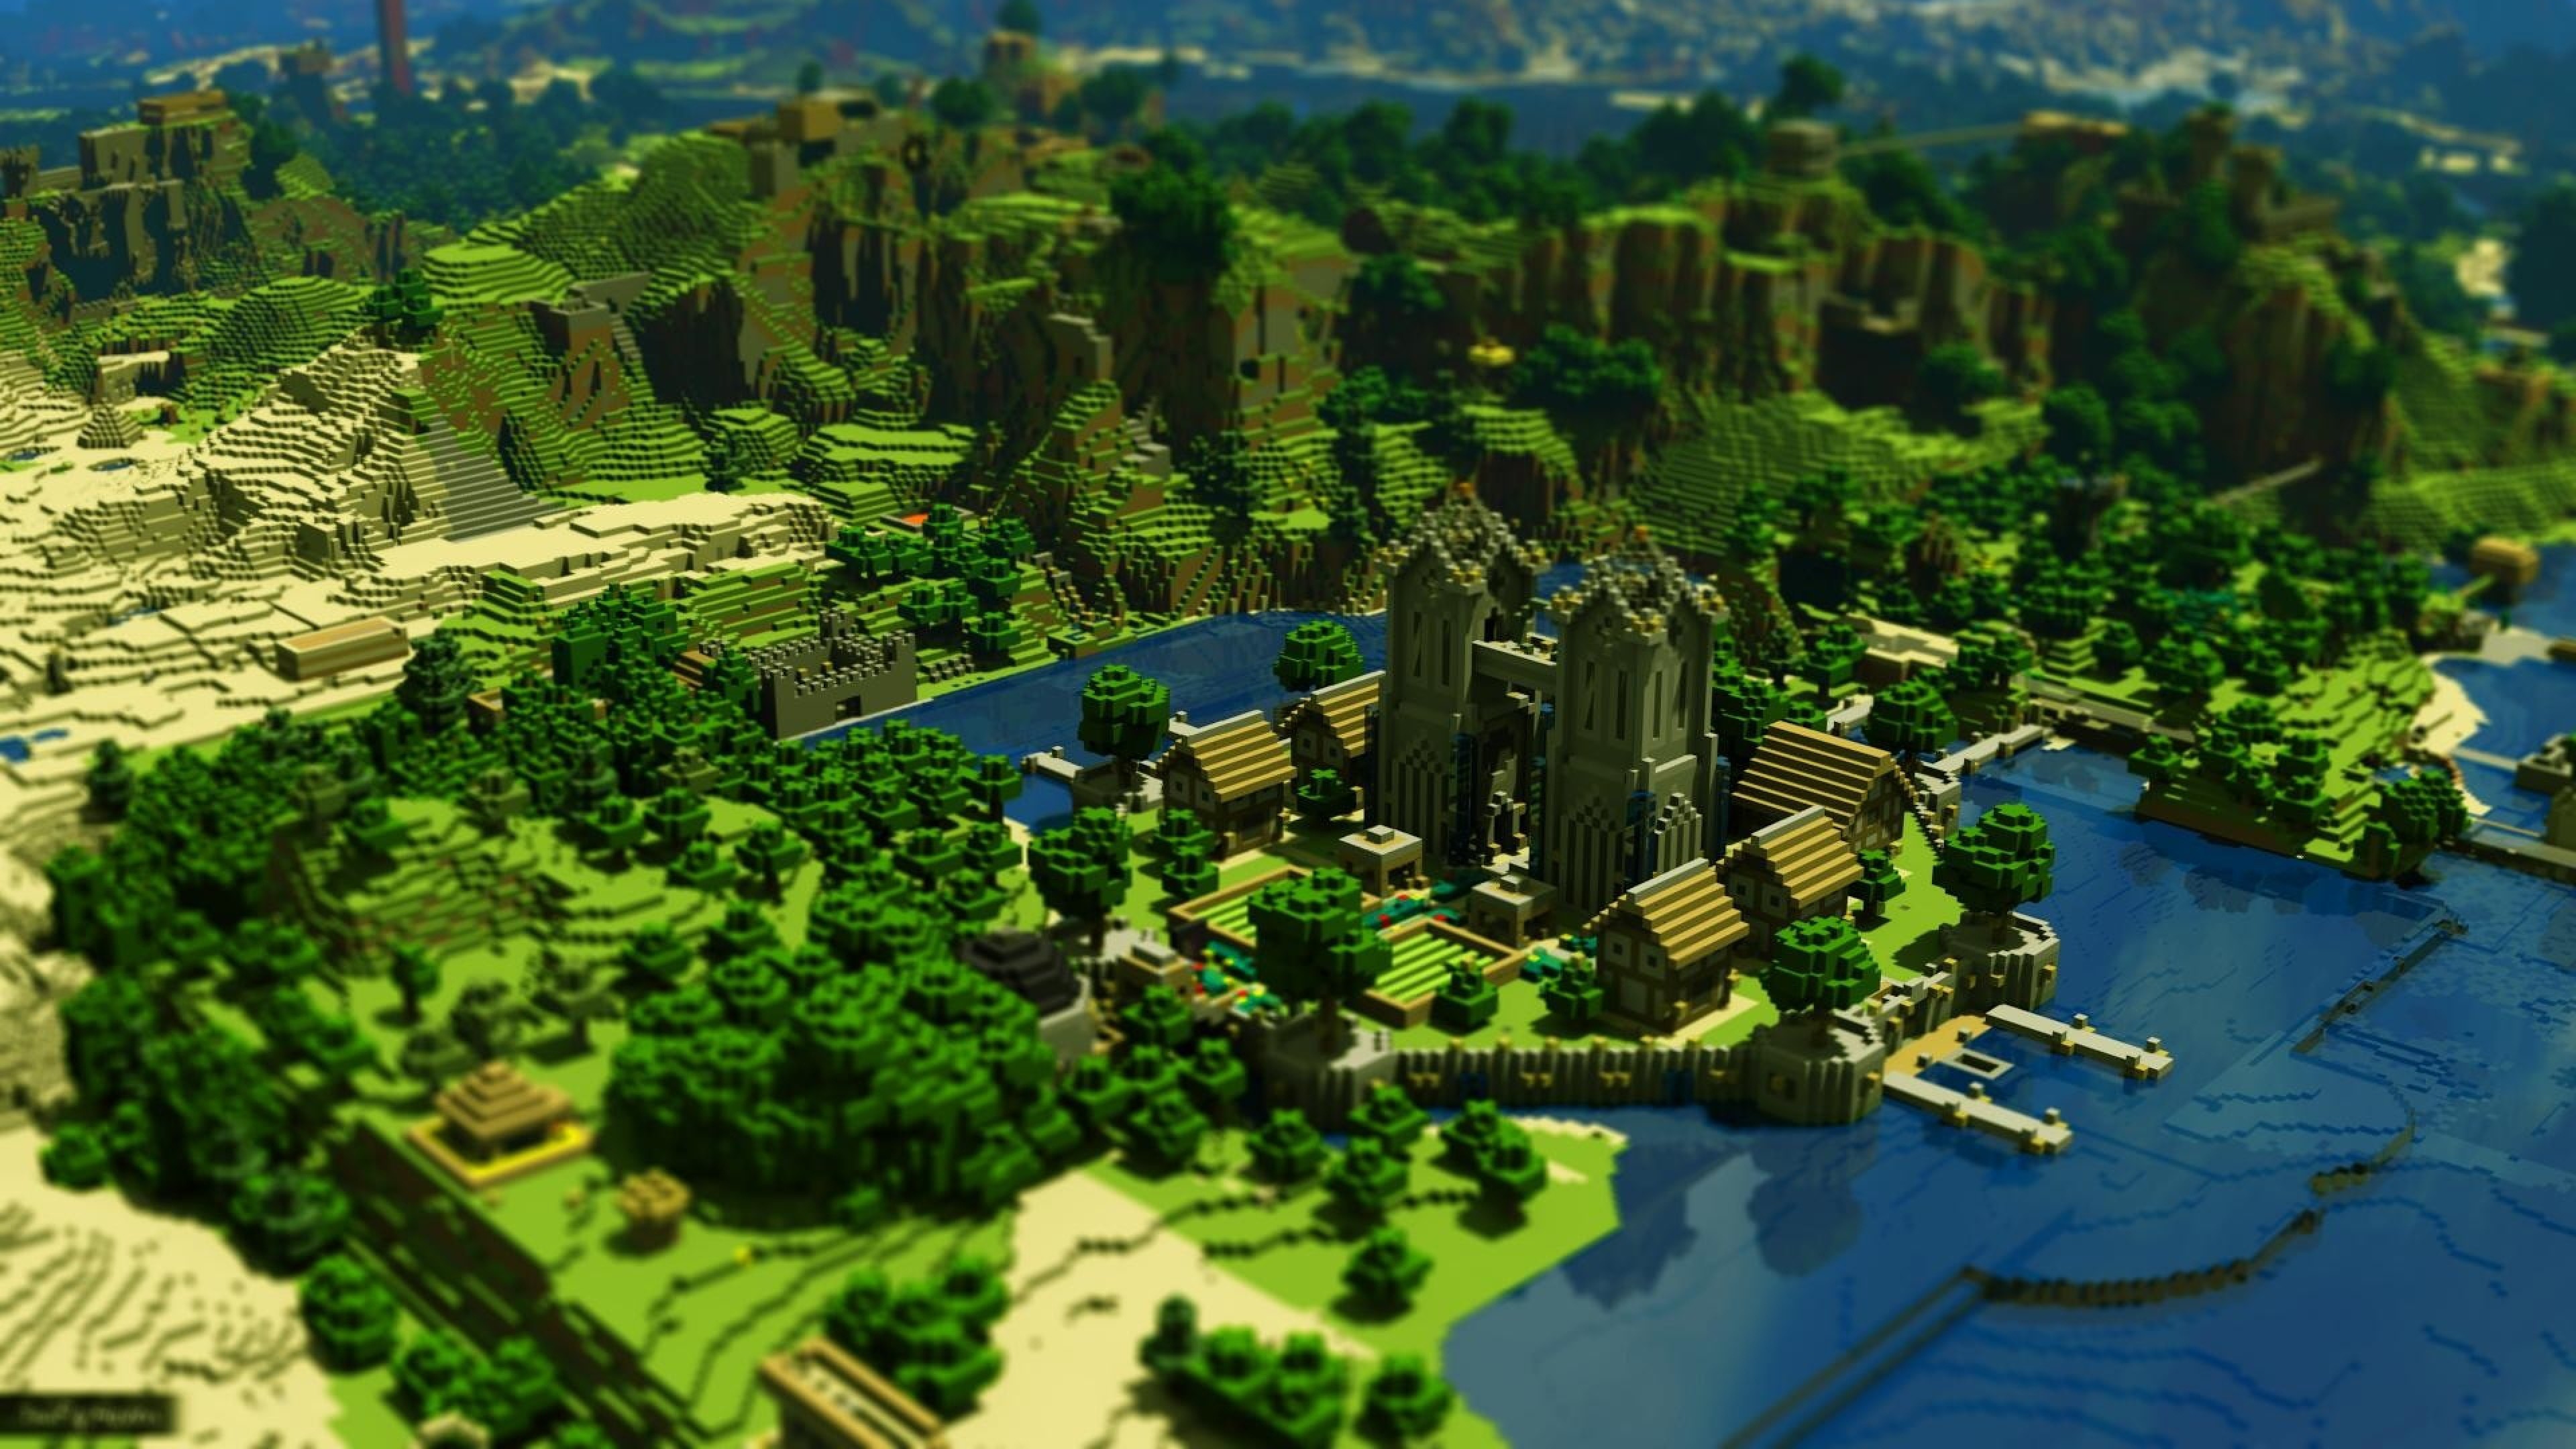 3840x2160 ... Background 4K Ultra HD.  Wallpaper minecraft, trees, houses,  mountains, water